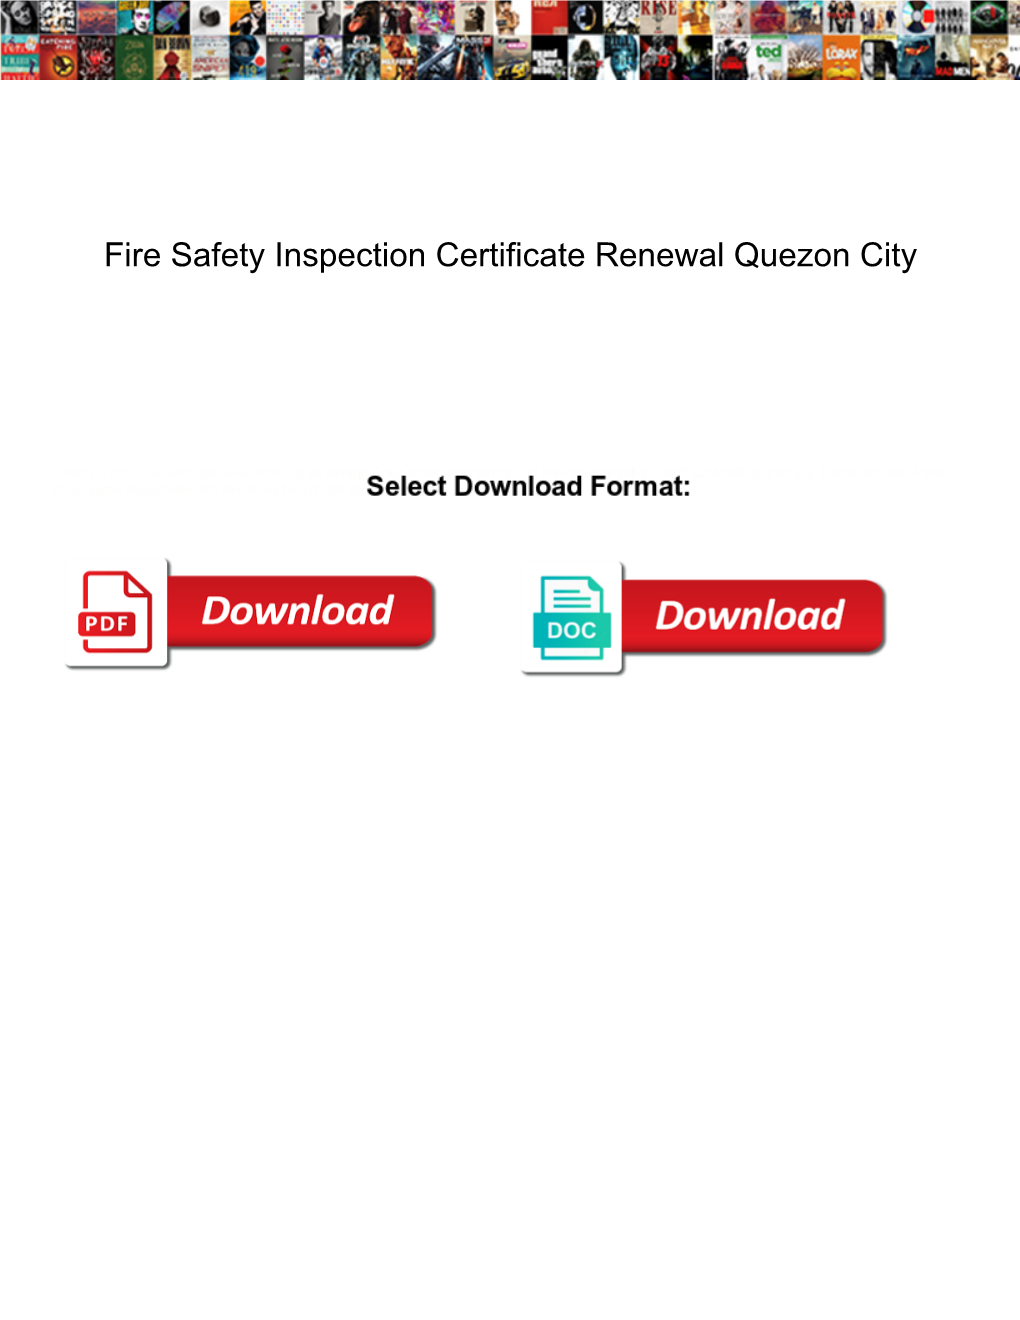 Fire Safety Inspection Certificate Renewal Quezon City